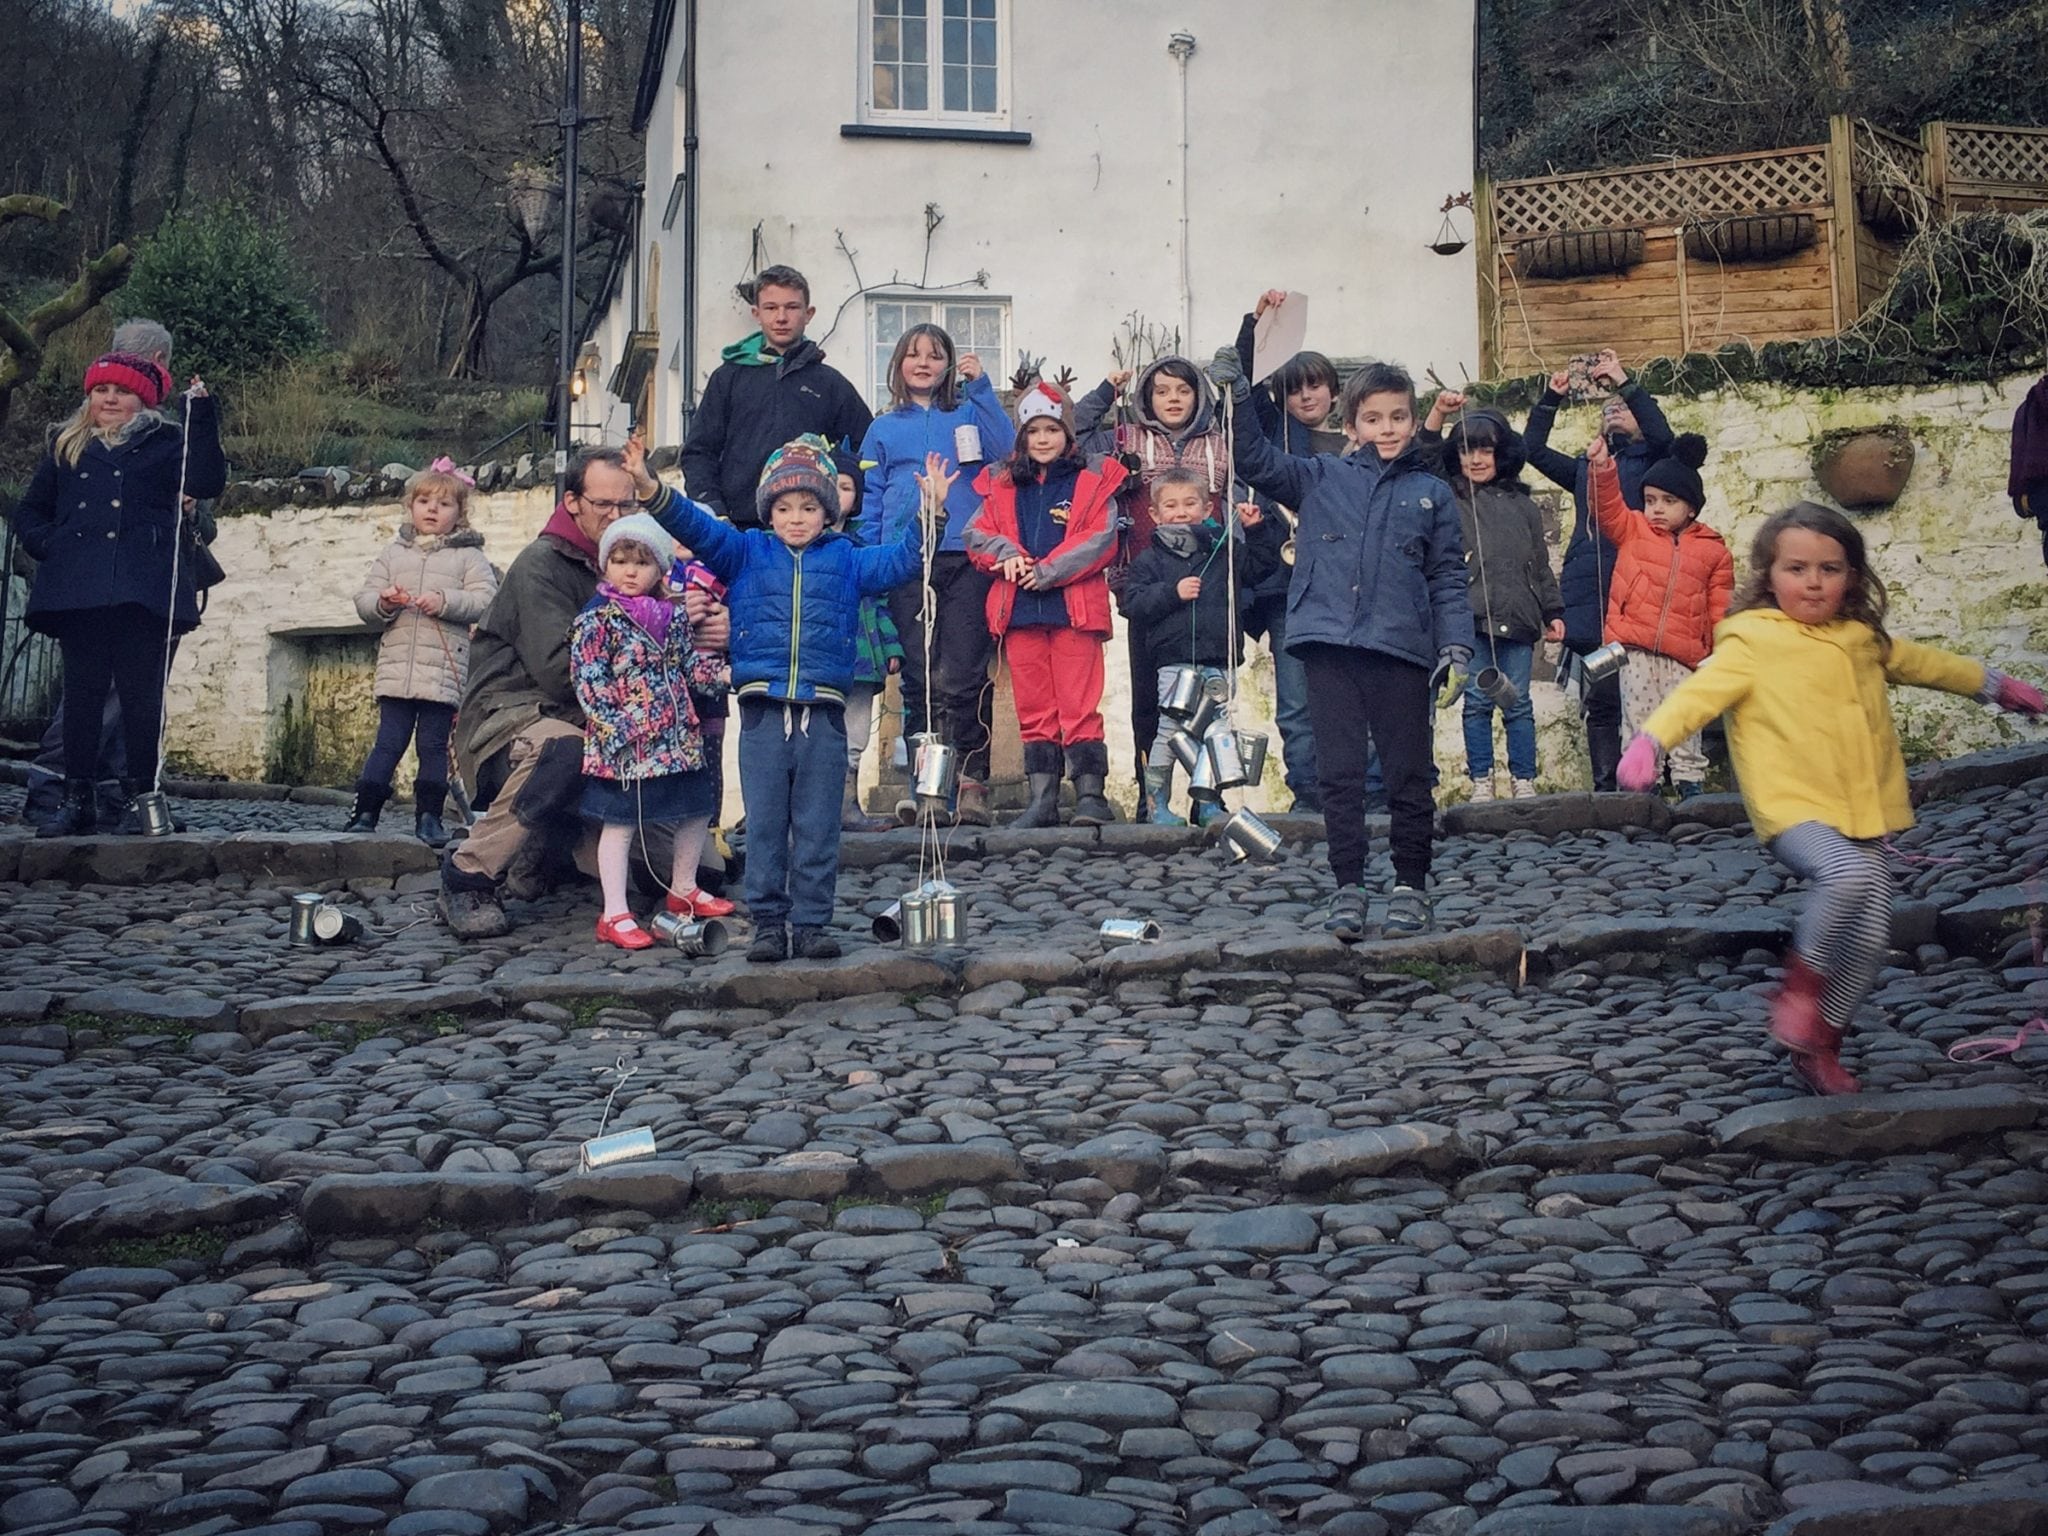 Lentsherd: A Clovelly tradition, by Ellie Jarvis